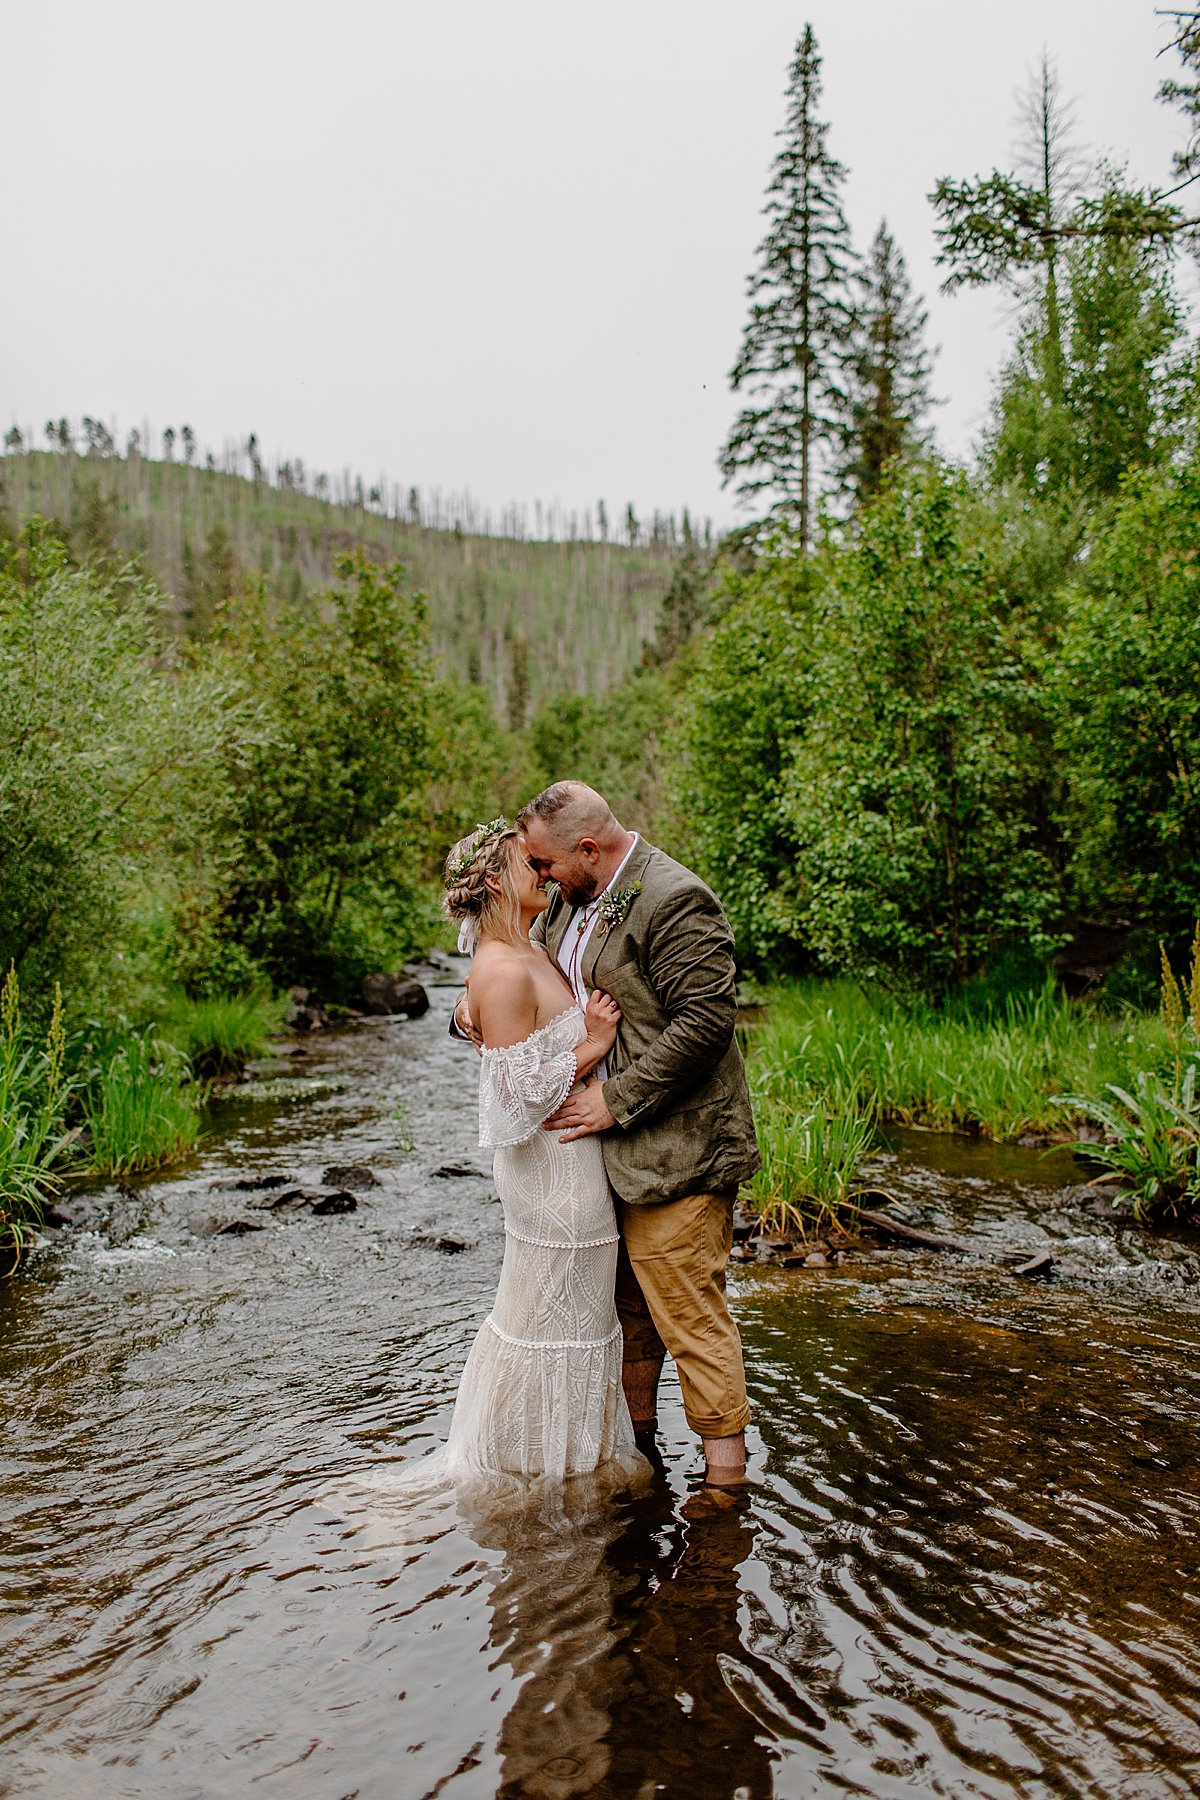  Couple splashing in the river of elopement location by Arizona adventure elopement photographer 